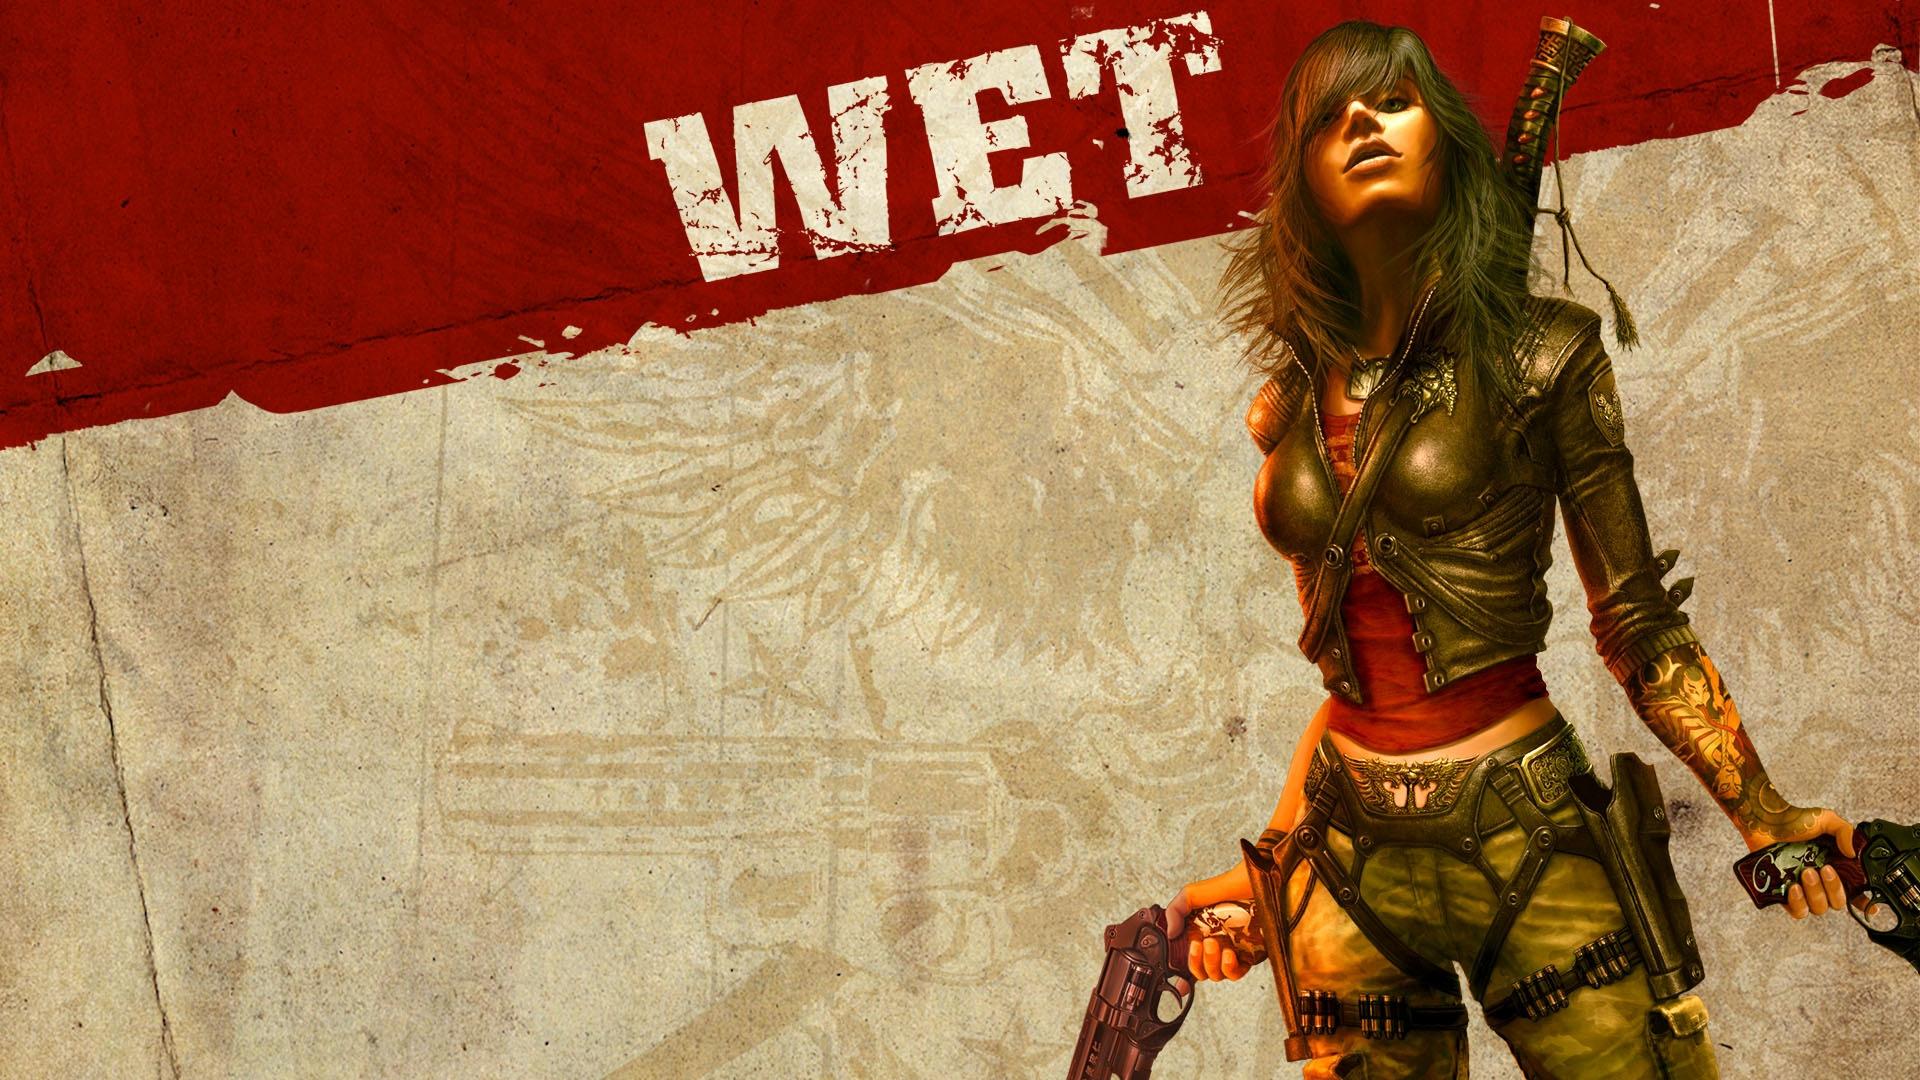 1920 x 1080 · jpeg - Wet (Video Game) Wallpapers HD / Desktop and Mobile Backgrounds